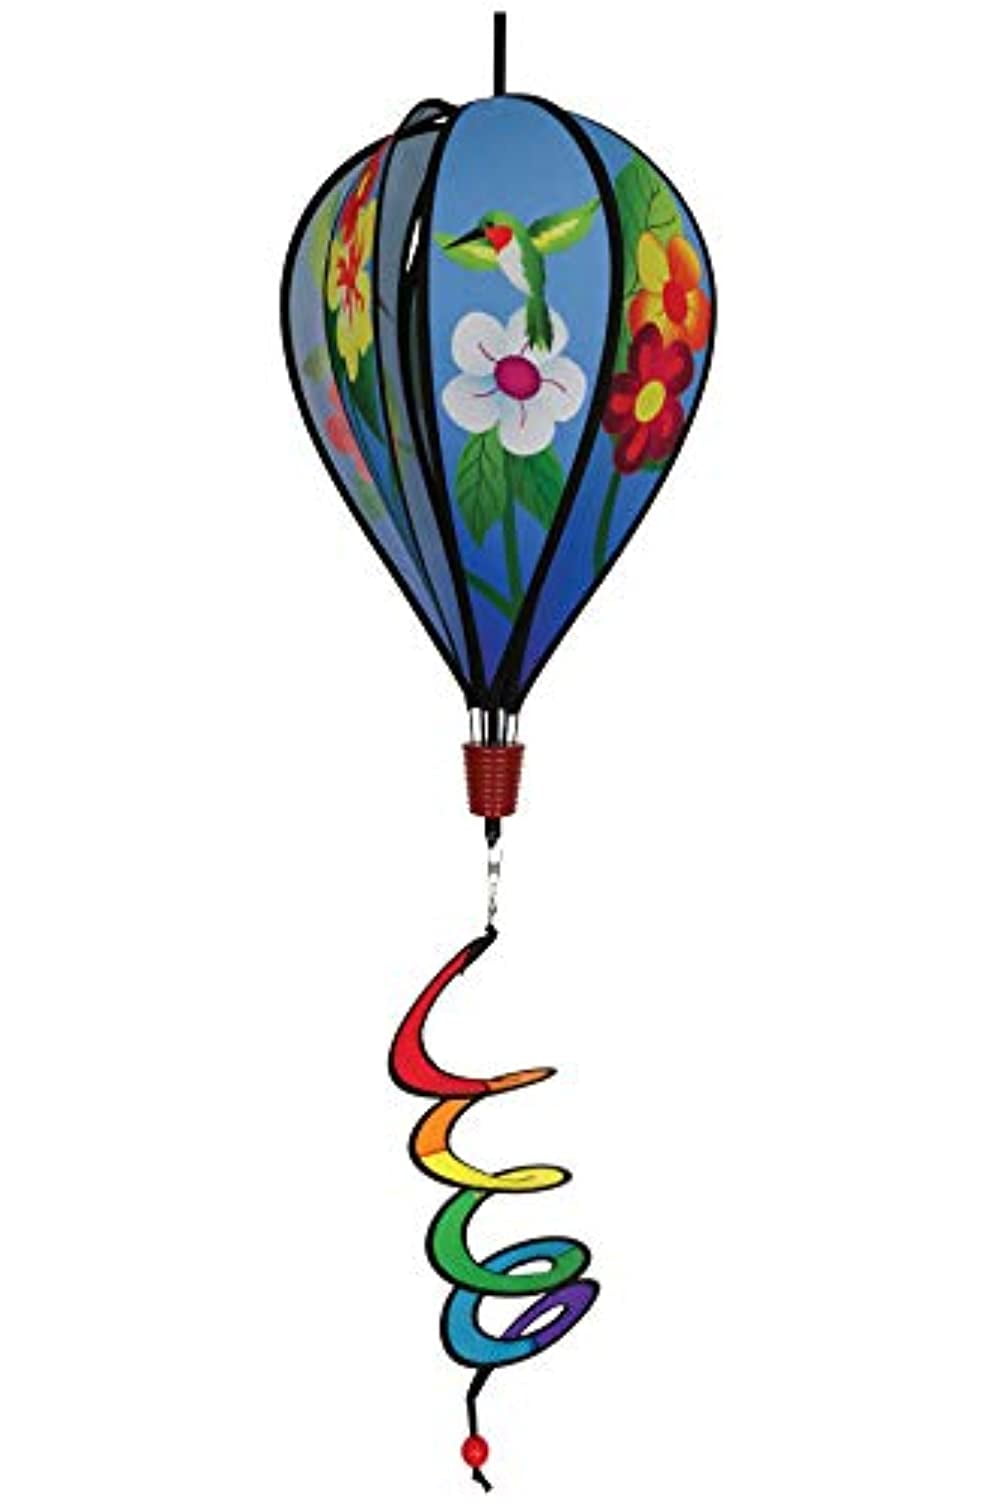 In the Breeze Patriot Sparkler 6-Panel Hot Air Balloon 